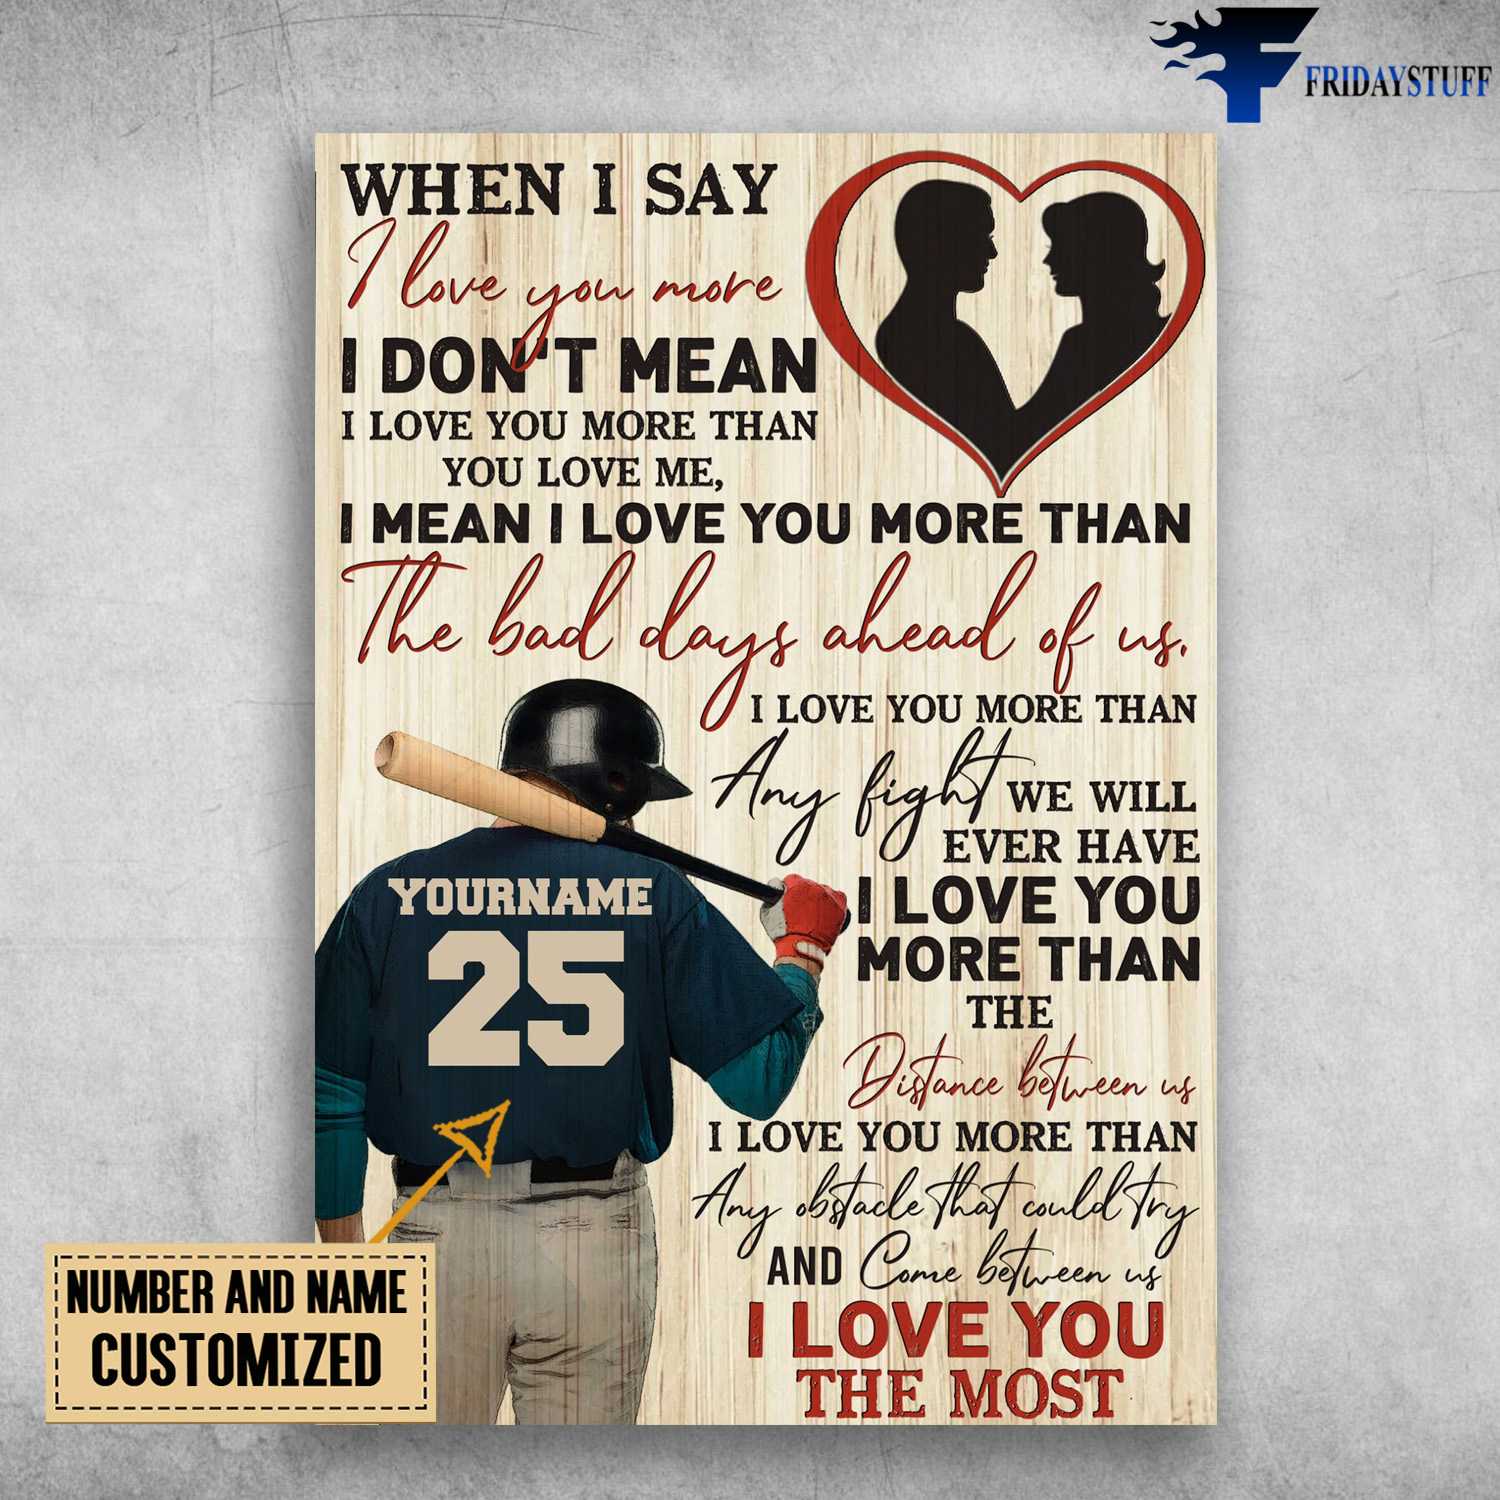 Baseball Poster, Gift For Lover, When I Say I Love You More, I Don't Mean I Love You More Than You Love Me, I Mean I Love You More Than The Bad Days A Head Of Us